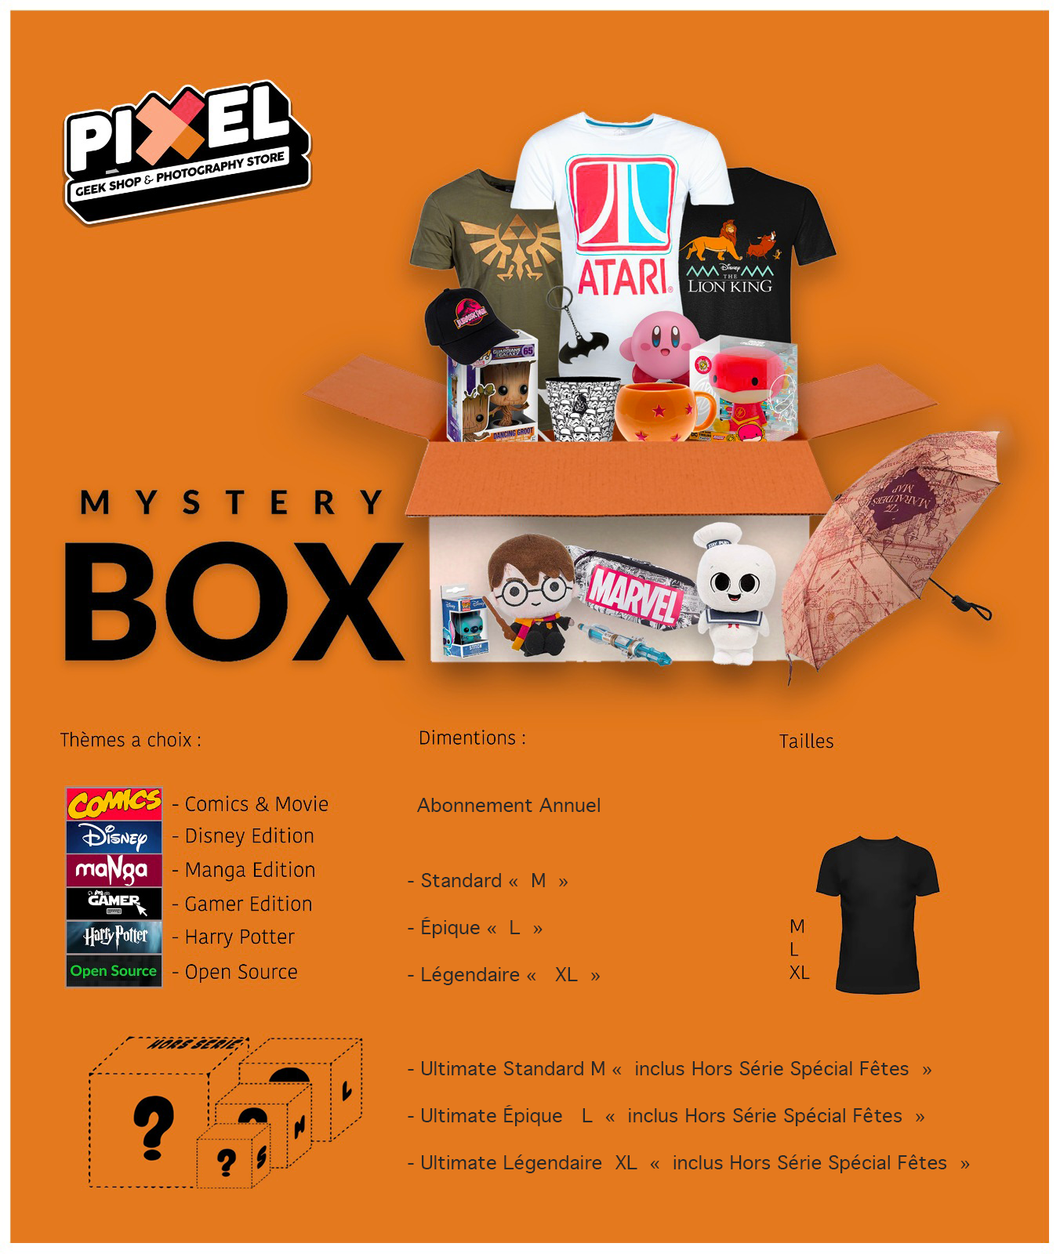 Mystery Box “Annual Subscription” S, M, L or XL